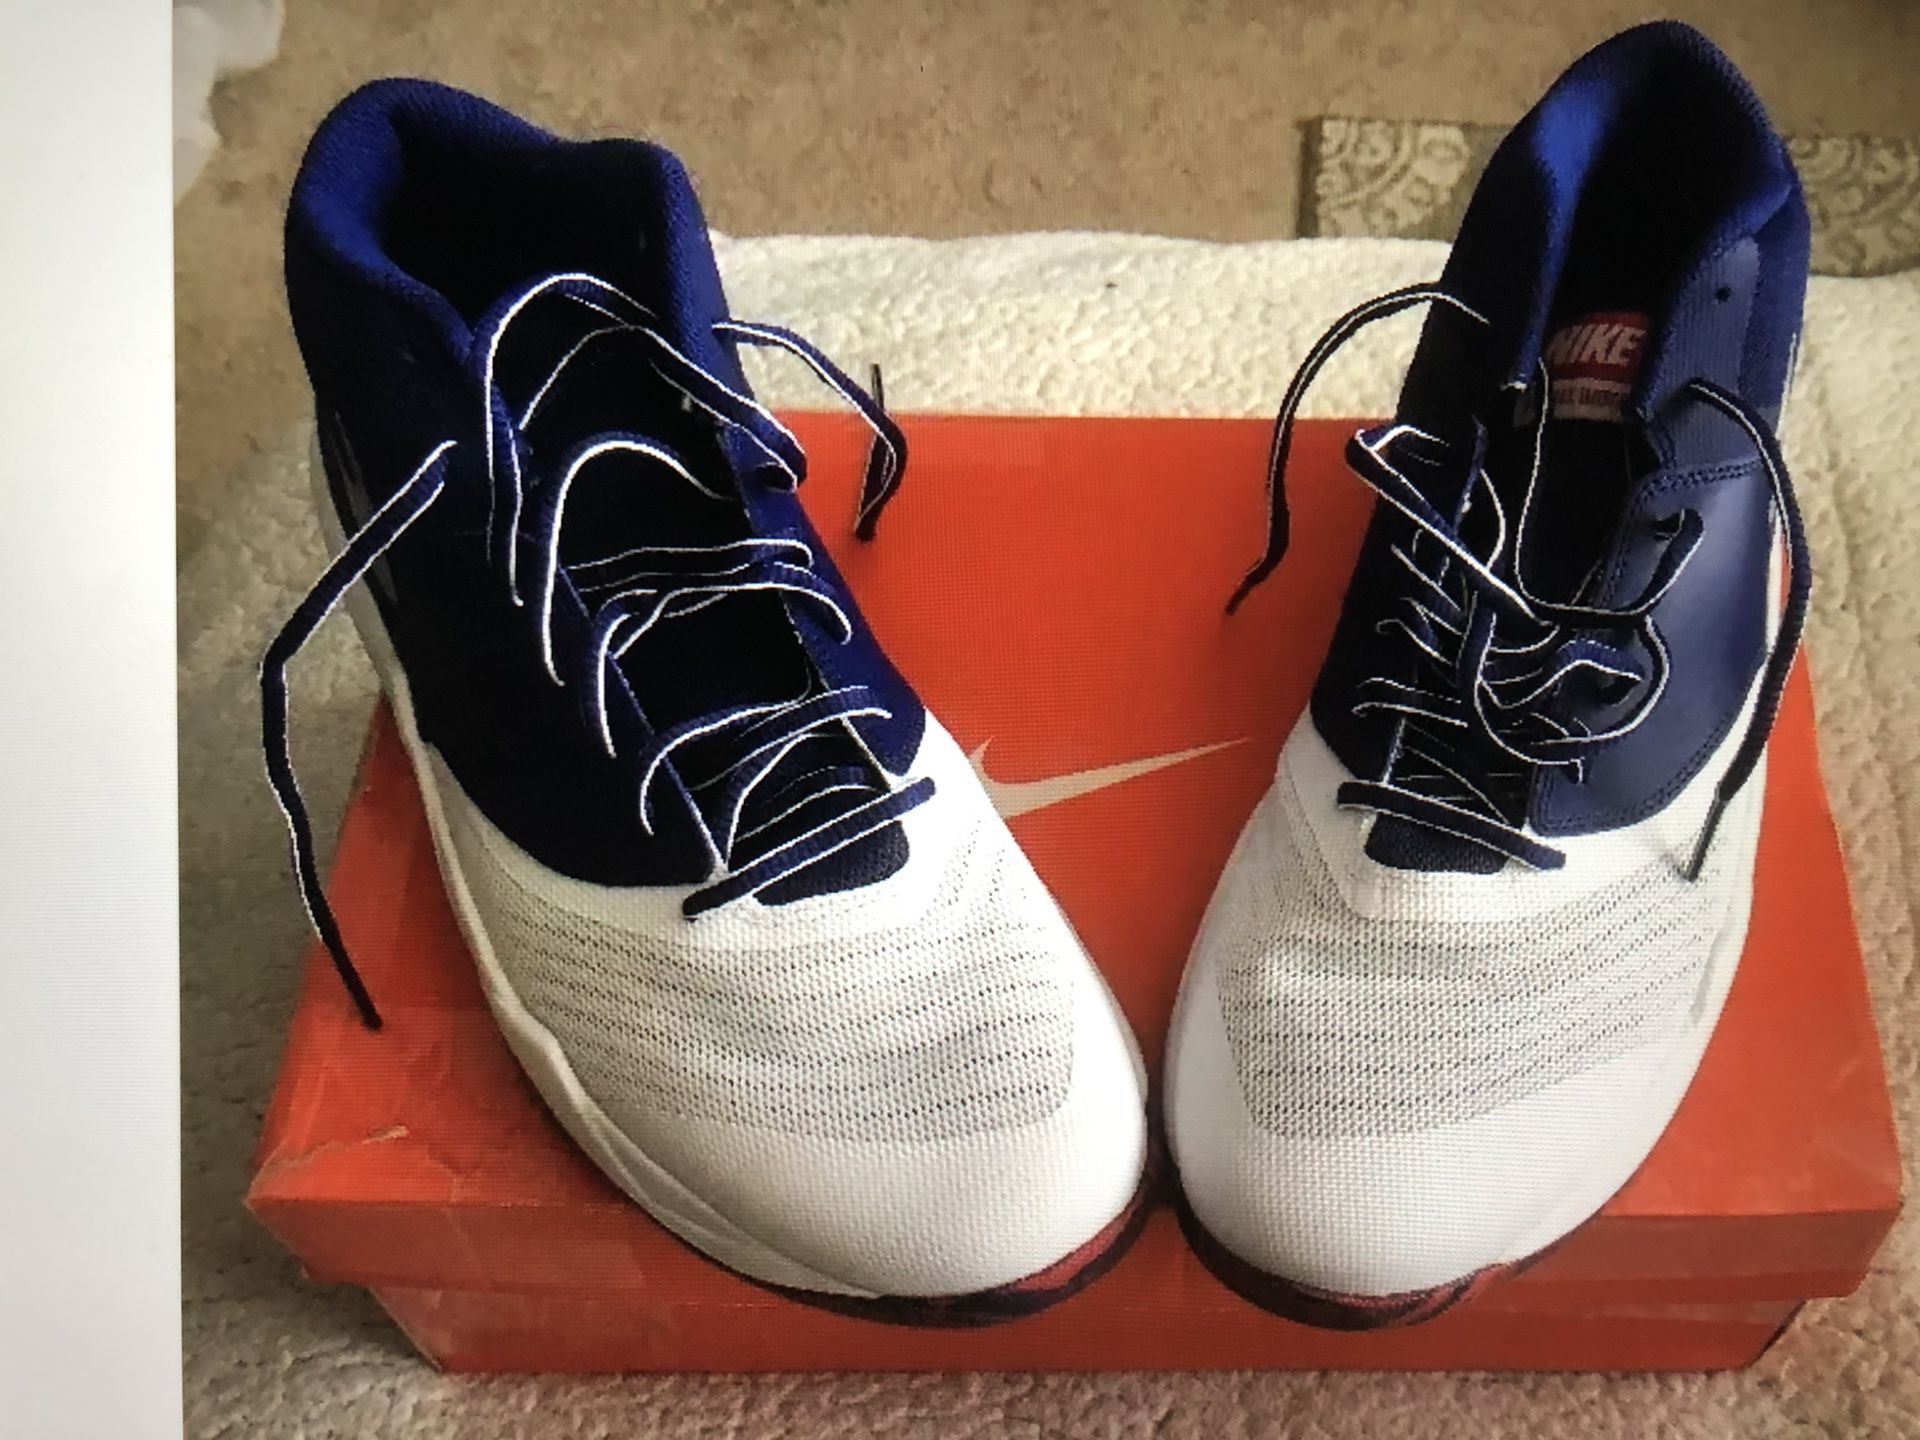 Beber agua Pesimista Camino New Nike Air Max Emergent White, Mtllc Silver, Royal Blue, Red Size 11 #  818954104 Brand New in the Original Box ( Box has wear). Never worn. for  Sale in Henderson, NV - OfferUp